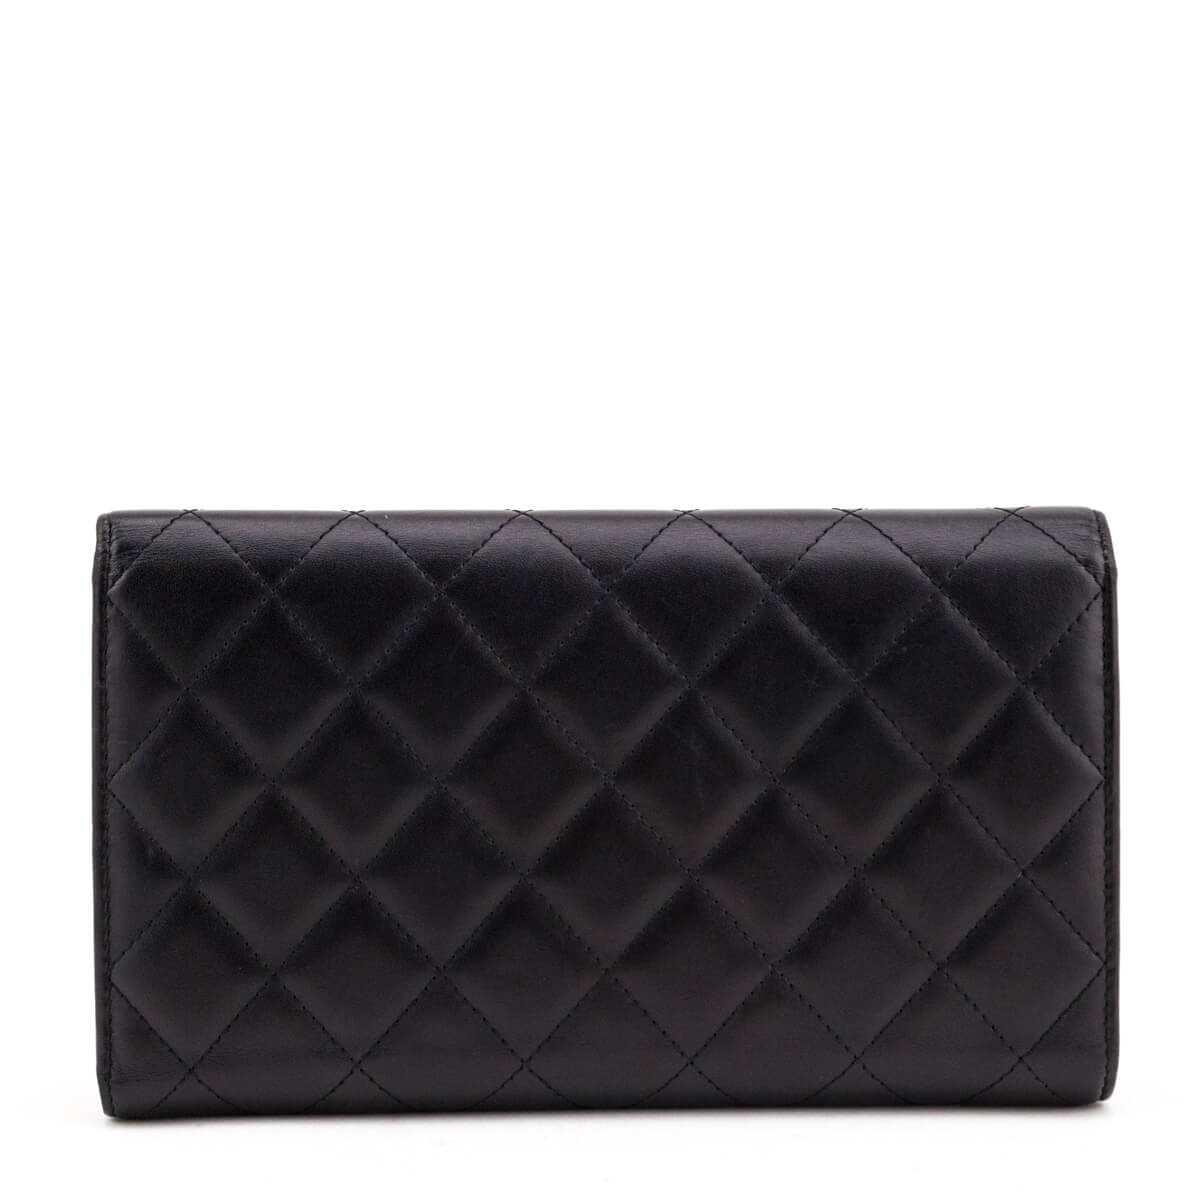 Chanel Black Quilted Calfskin Ligne Cambon Tri-Fold Wallet - Chanel CA